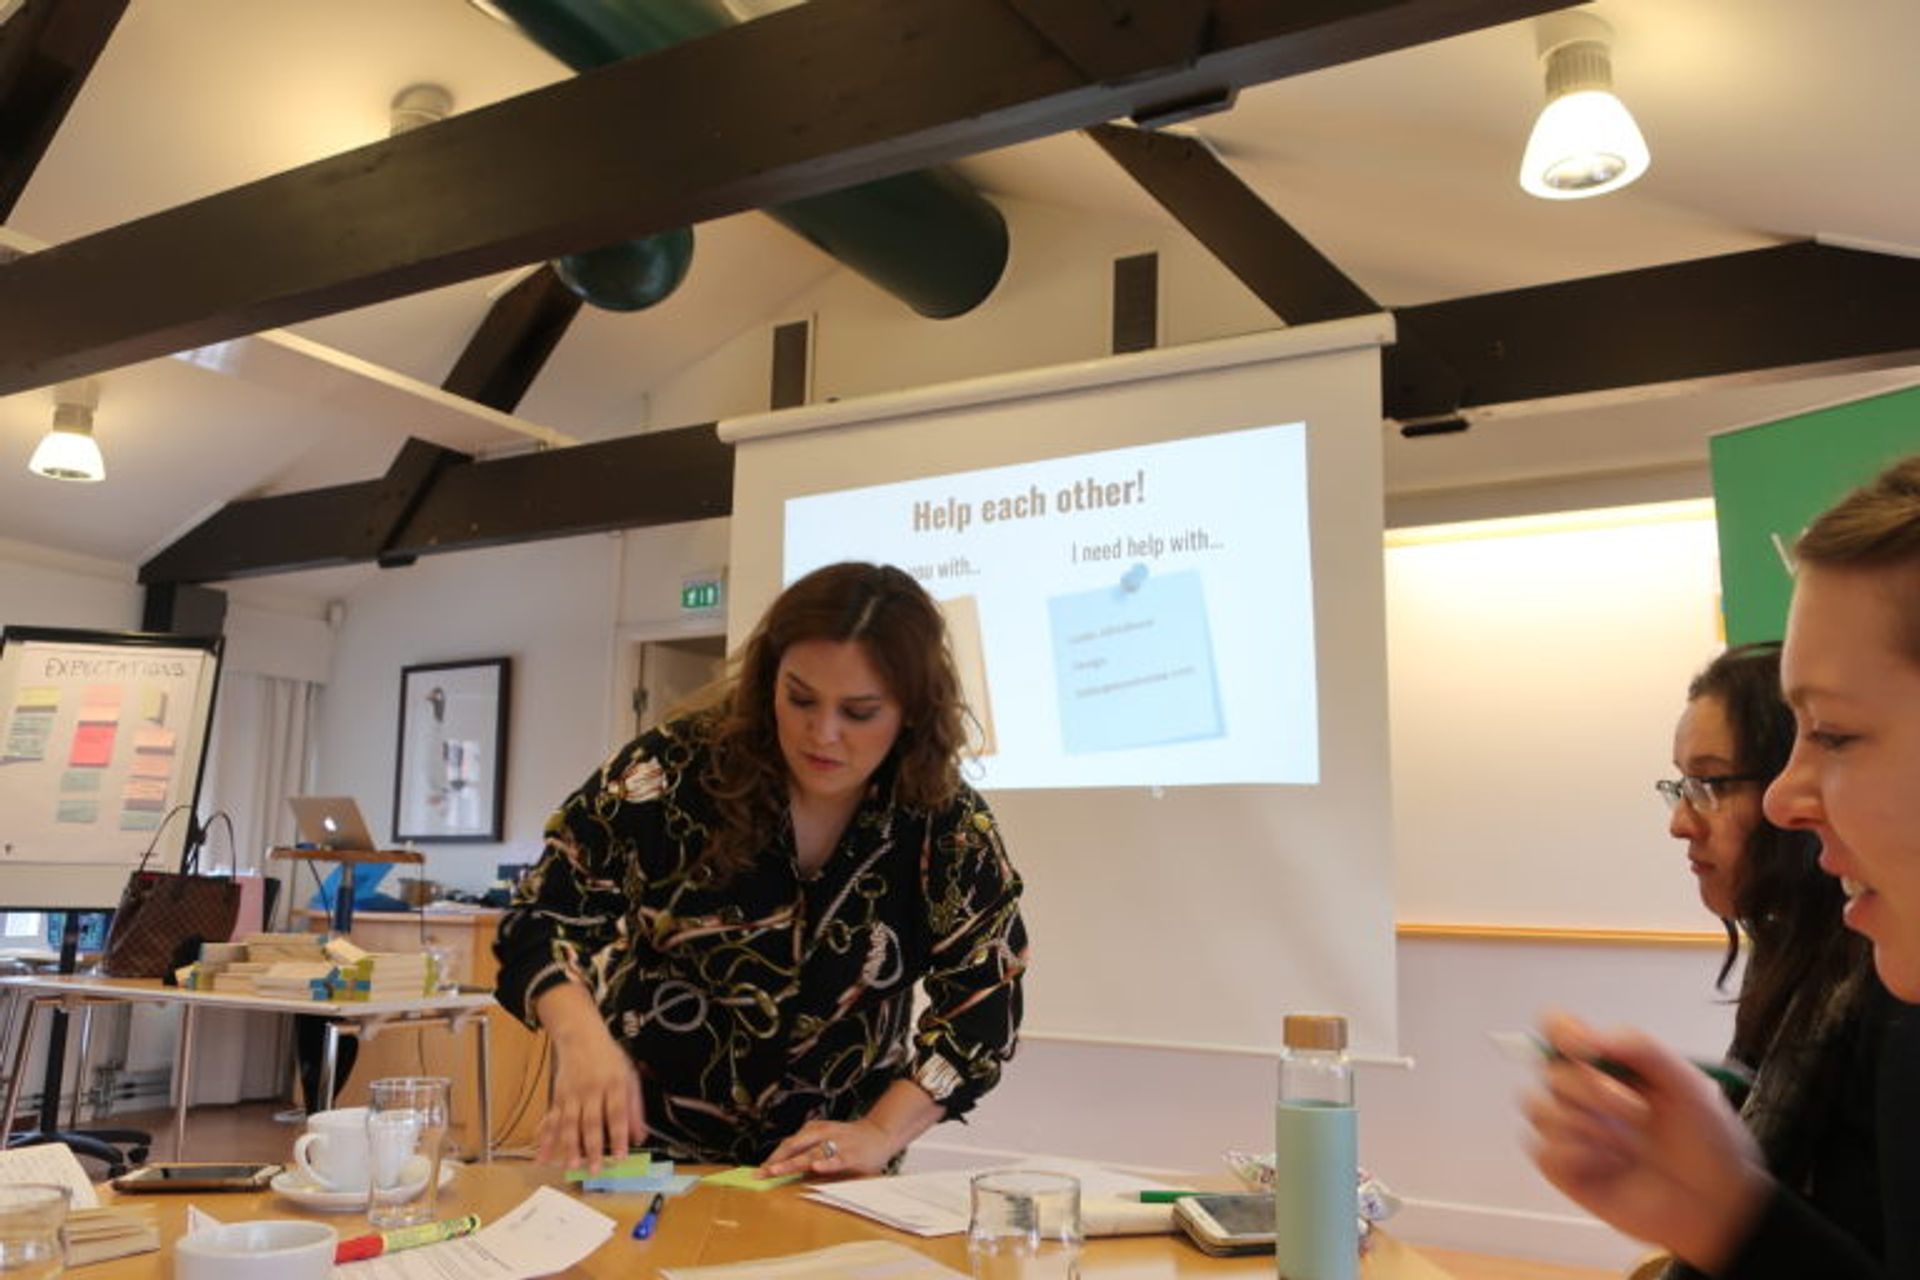 An ongoing workshop where a woman is about to write on a post-it while two other women are looking at her. In the background, you can see a white big screen saying "help each other".